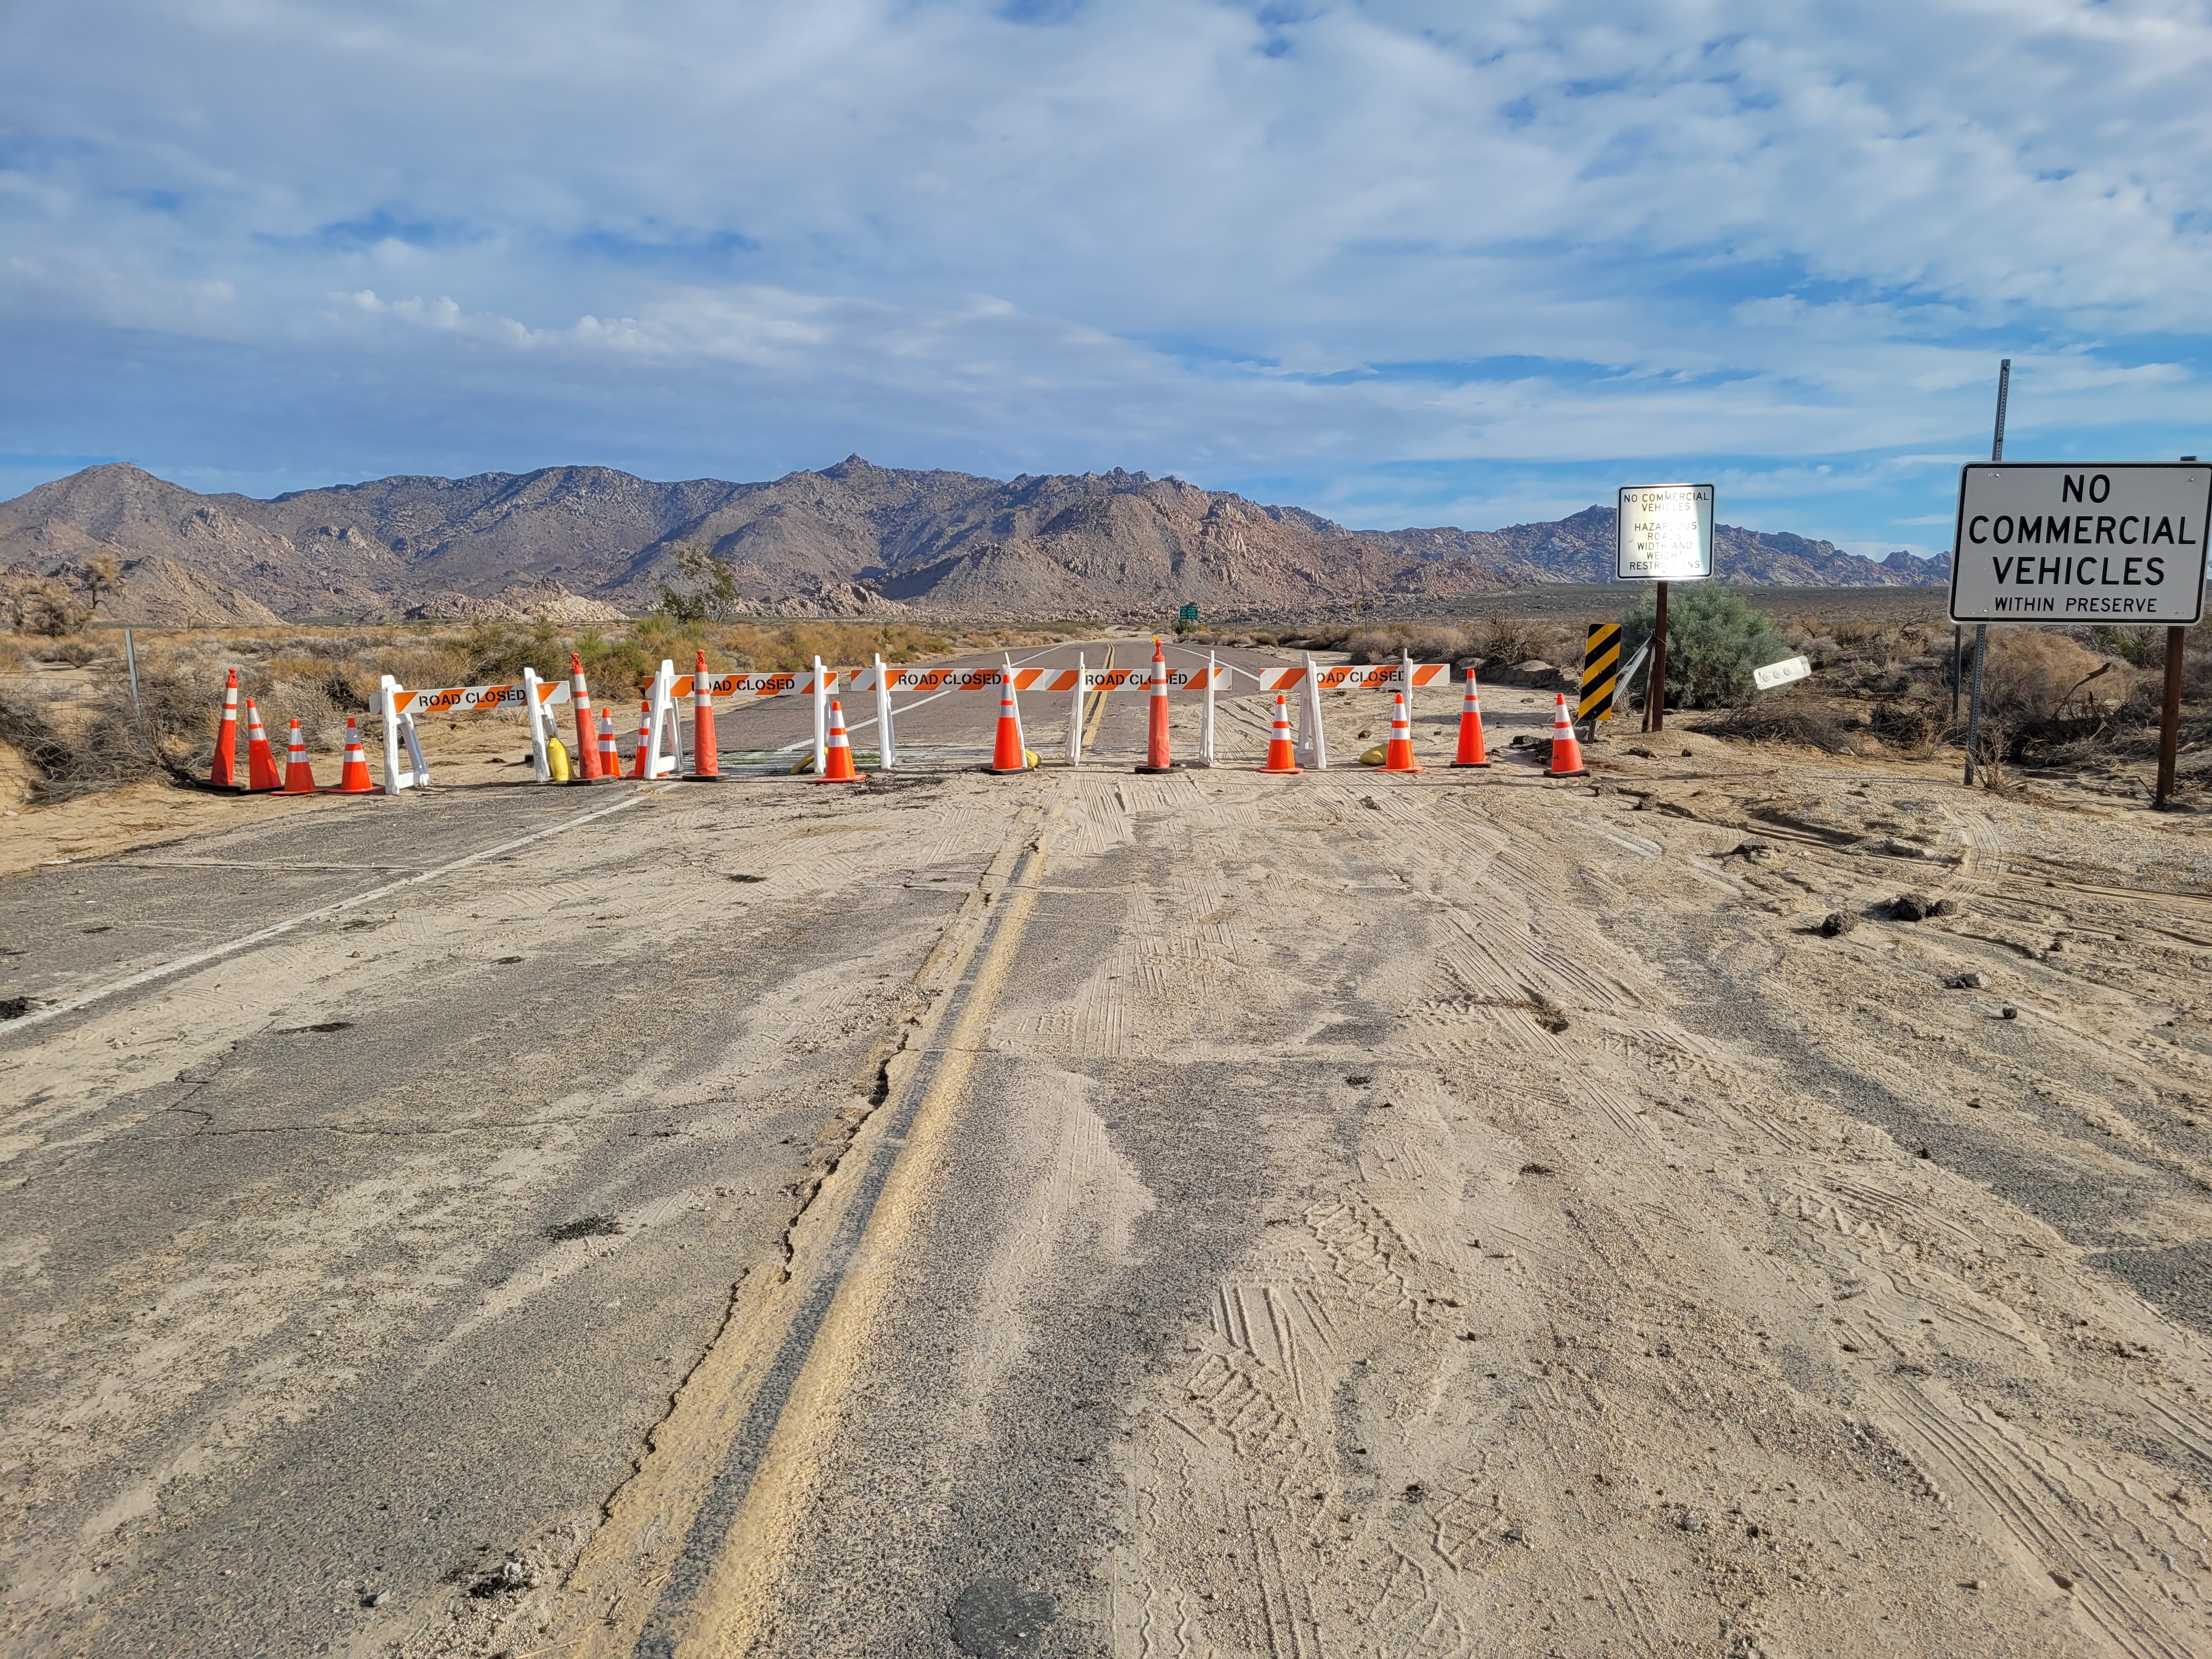 Temporary road closures from monsoon rains near the mountains can affect field work. 